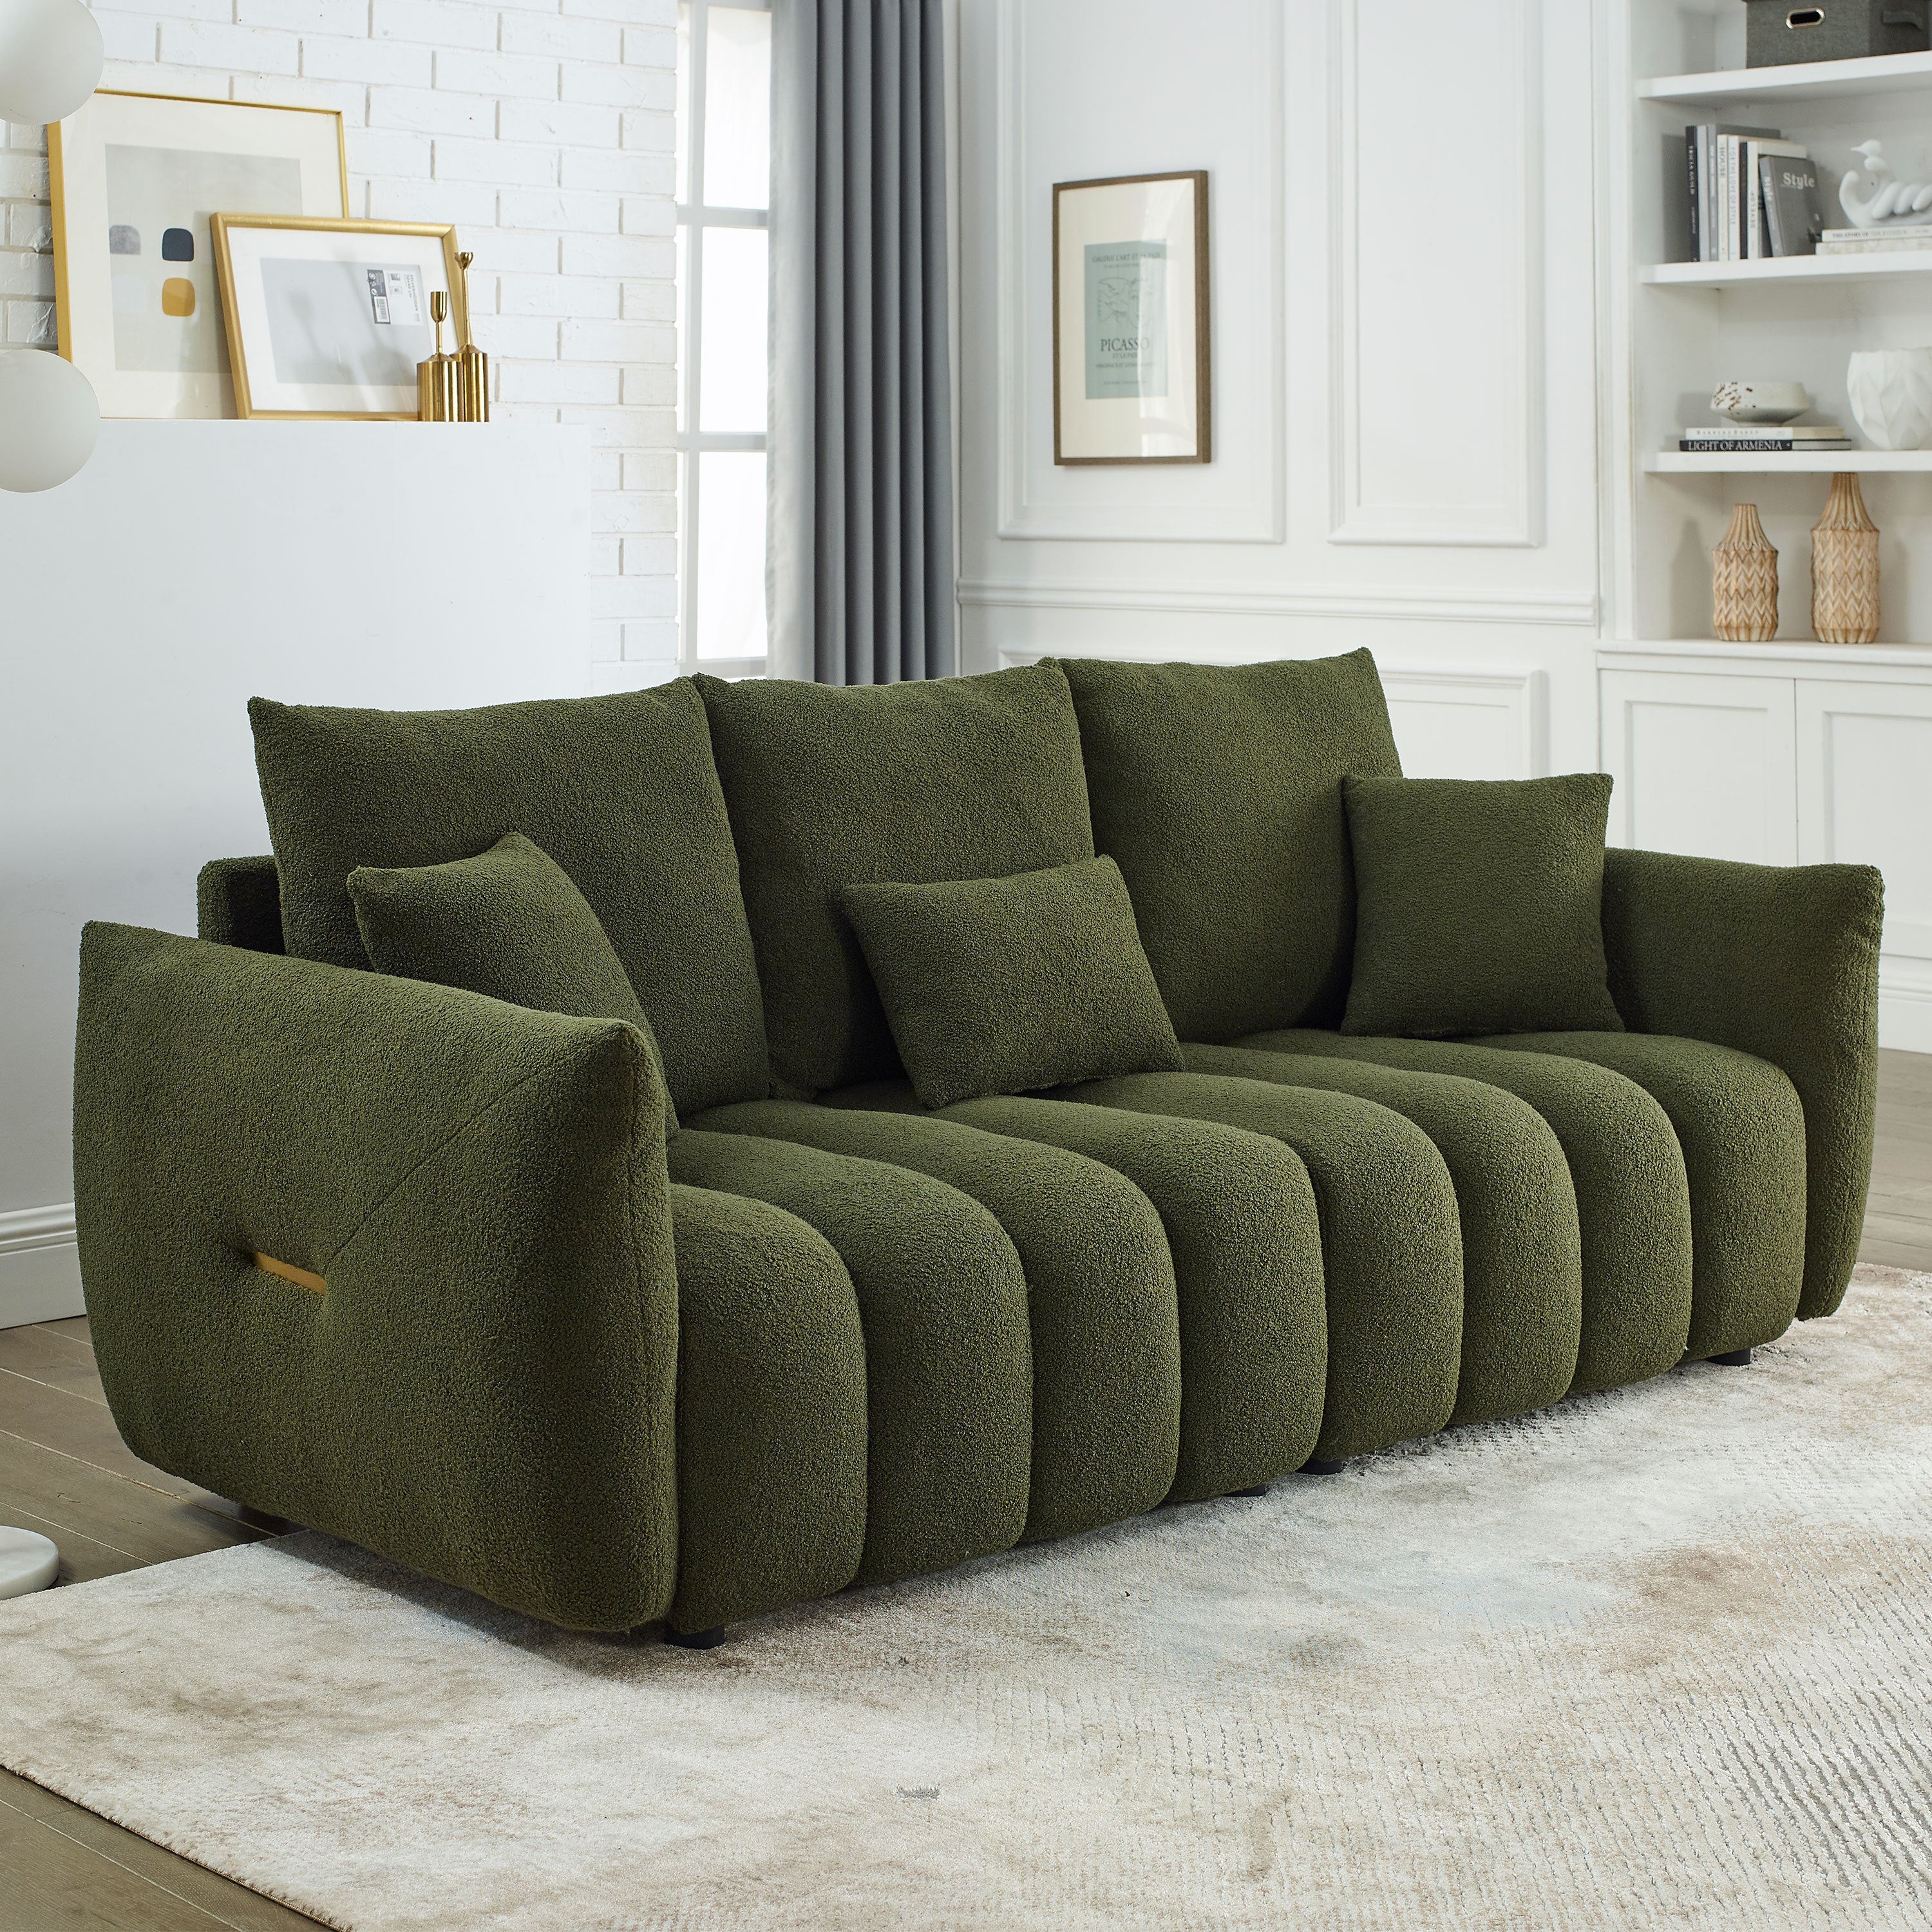 🆓🚛 82" Premium Teddy Velvet Sofa With 3 Back Pillows and 3 Back Cushions Solid Wood Frame 3-Seater Sofa, Green